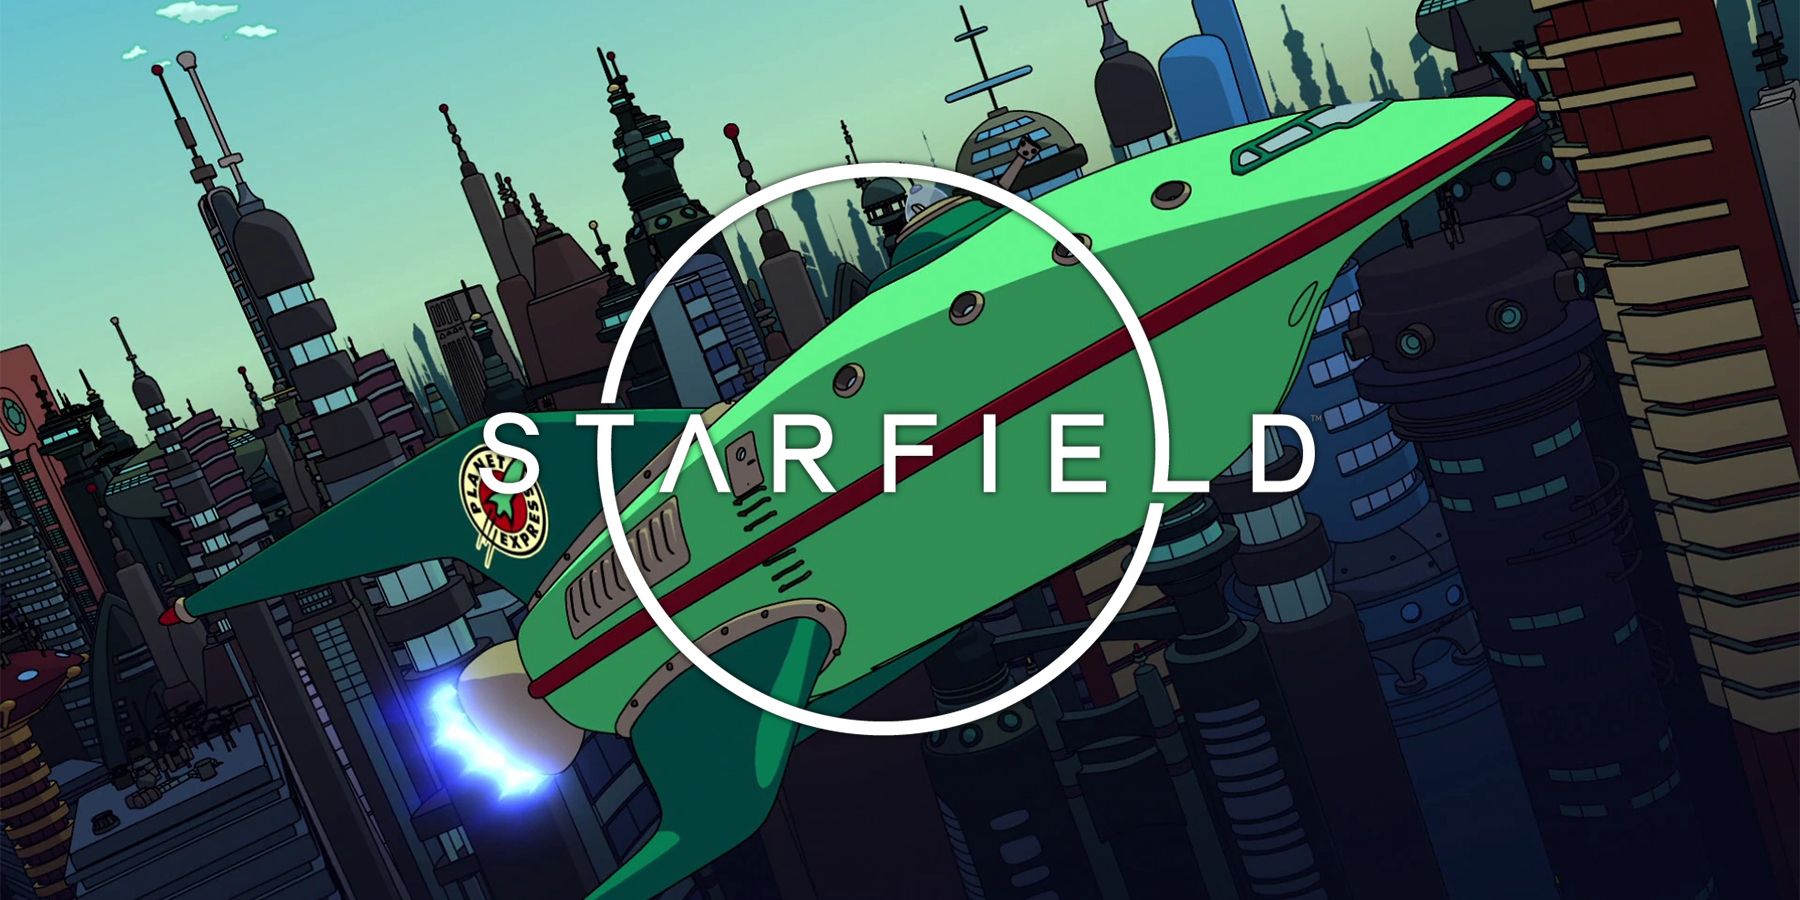 Players discovered that a picture of media praising Starfield was